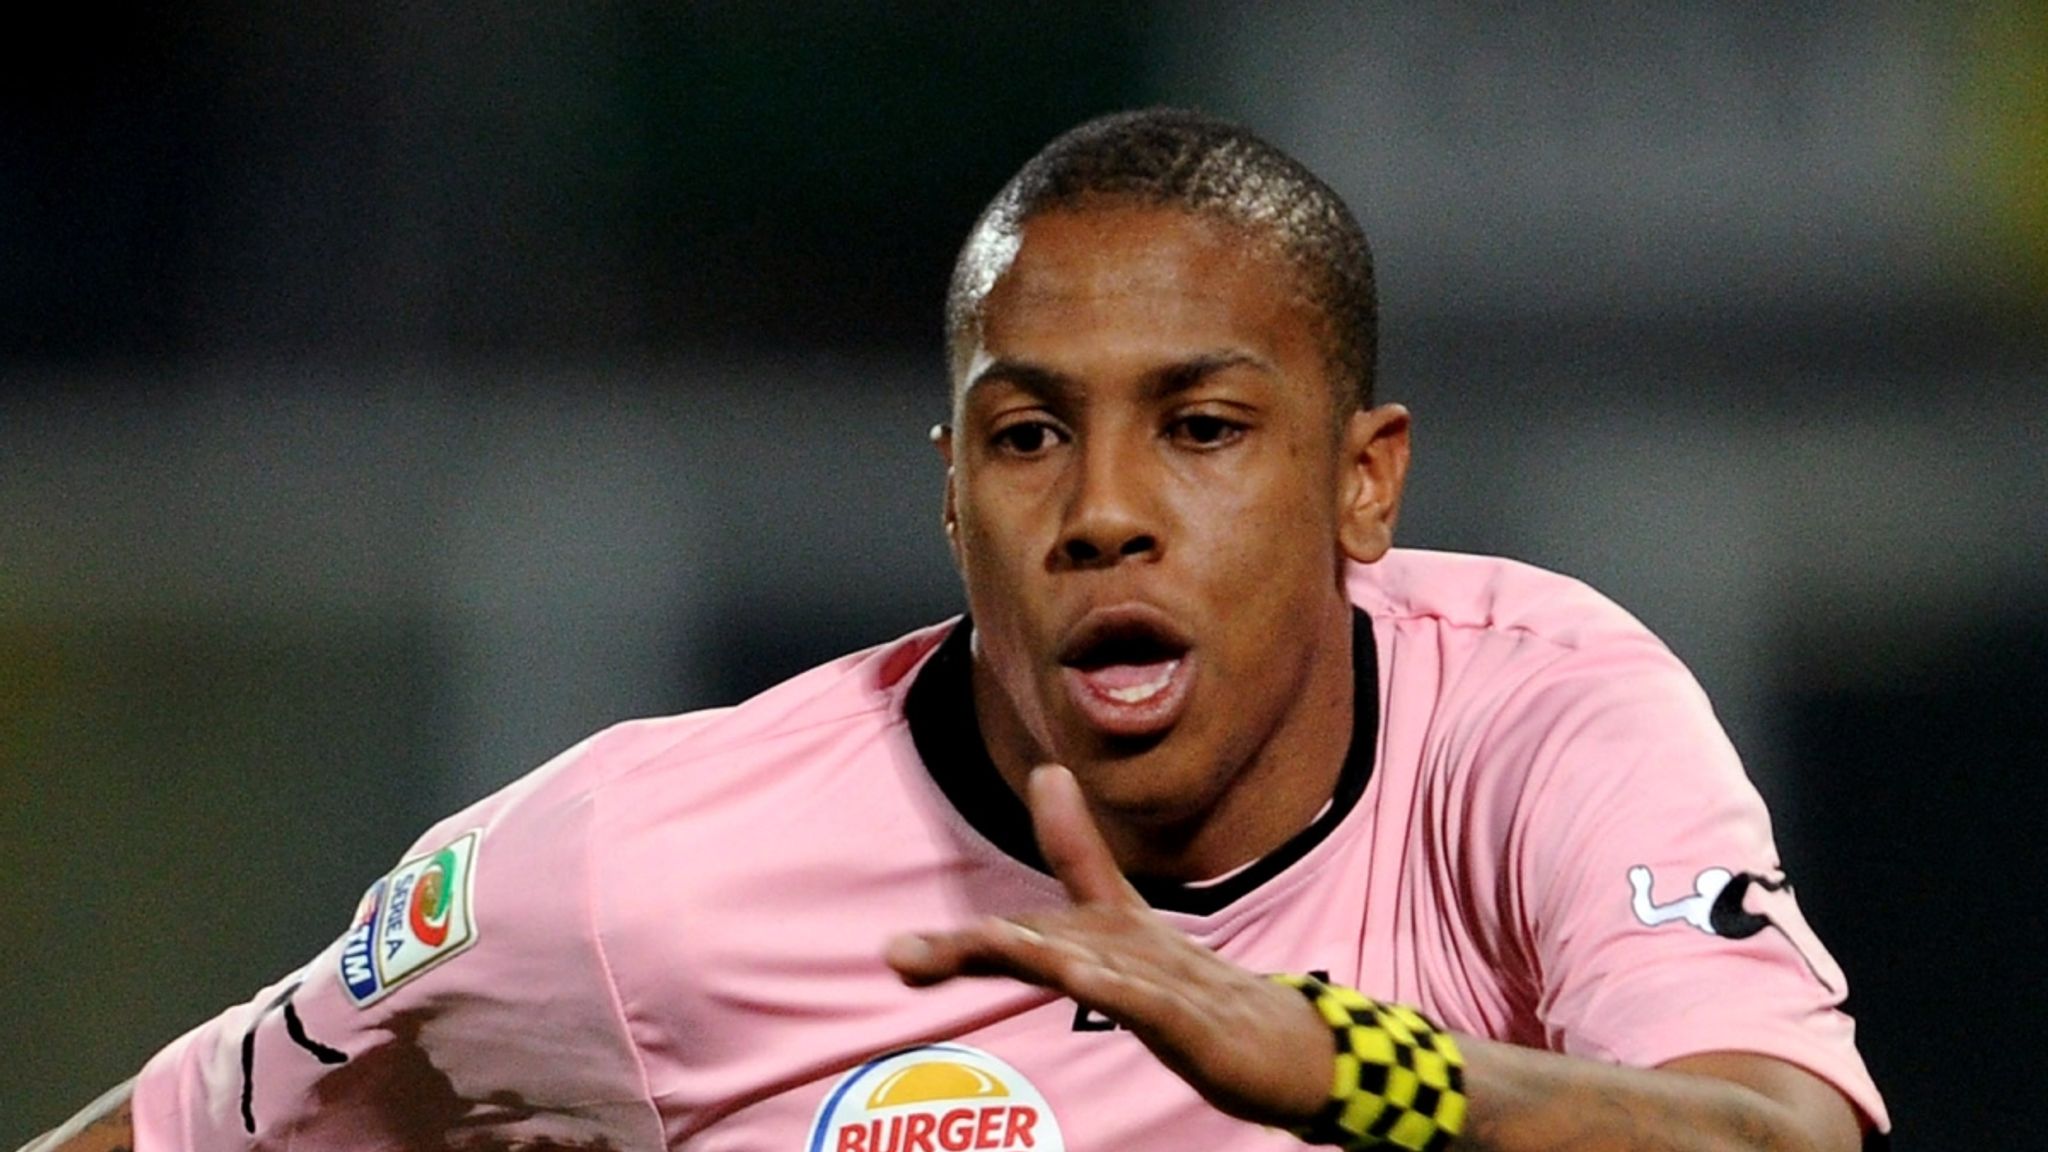 US Palermo News, Fixtures & Results, Table, Players